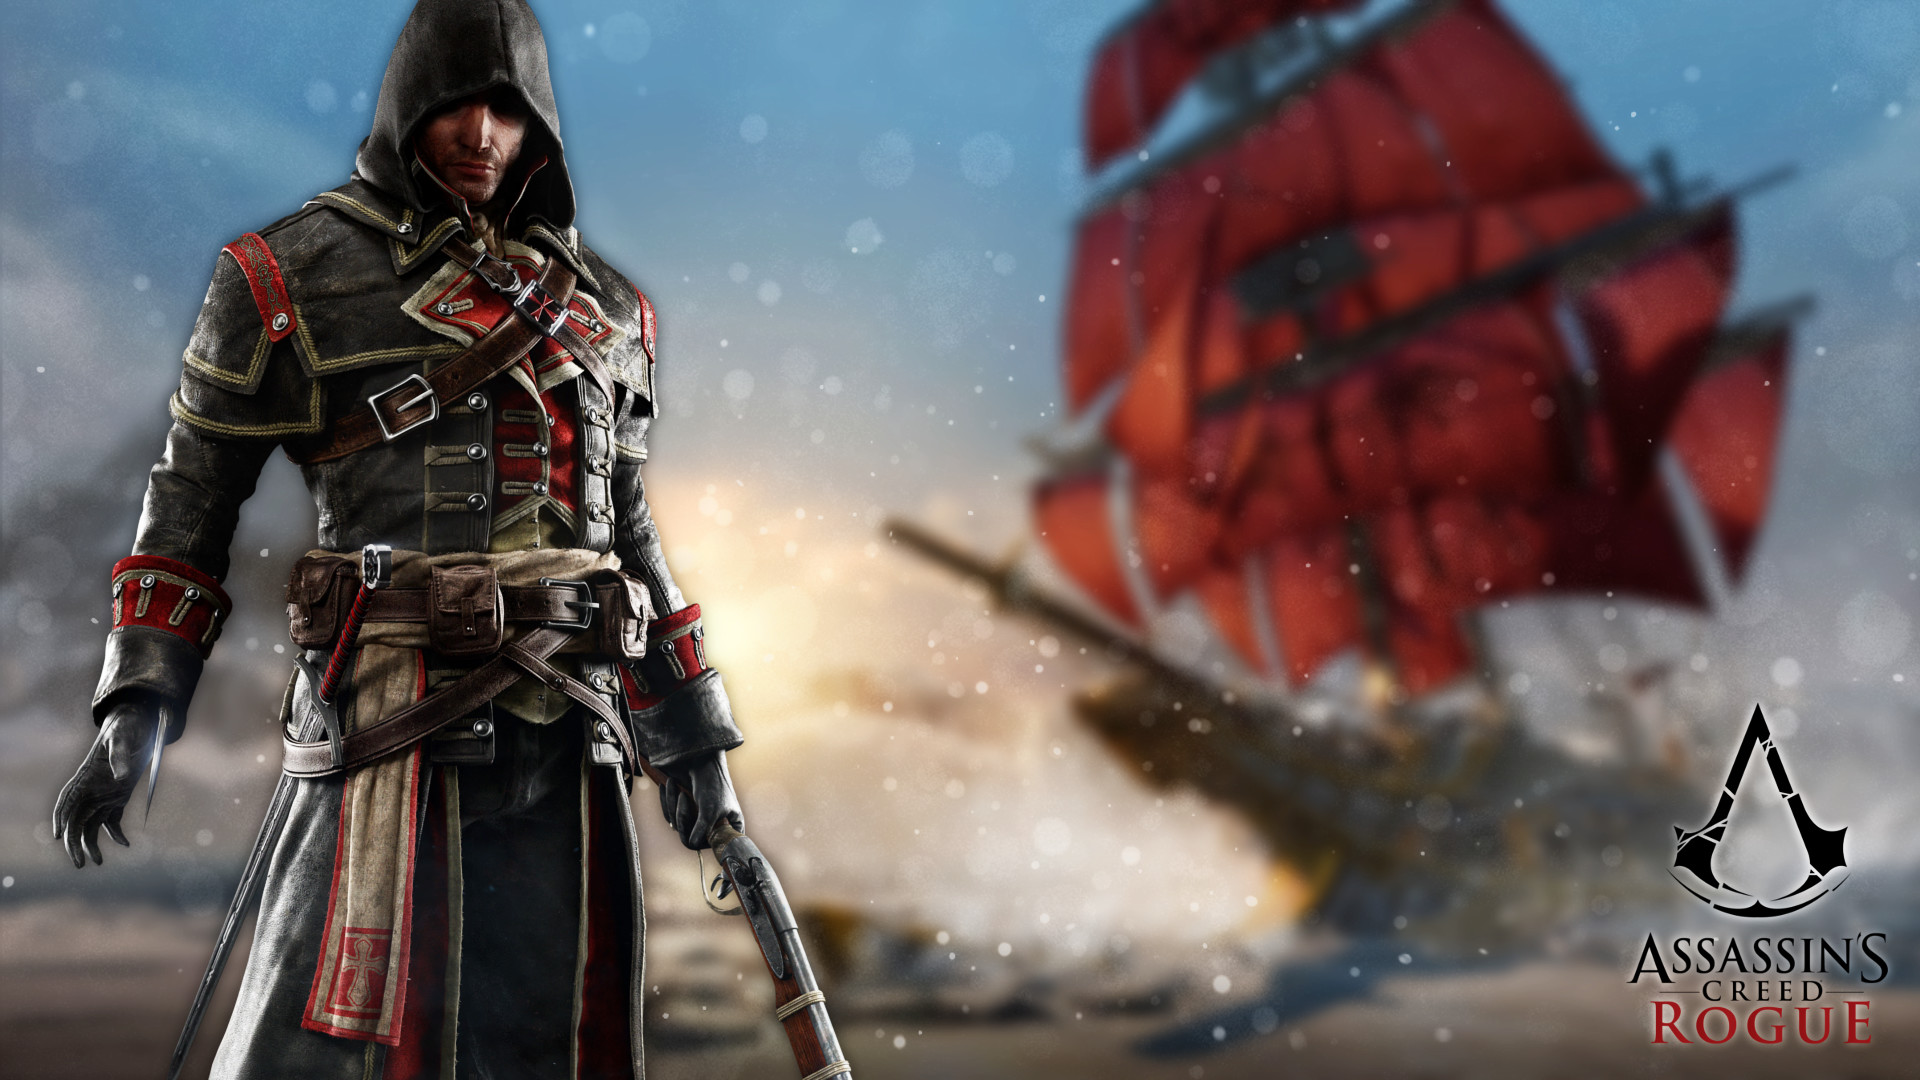 1920x1080 Assassin's Creed Rogue Wallpaper by ZeroMask Assassin's Creed Rogue  Wallpaper by ZeroMask